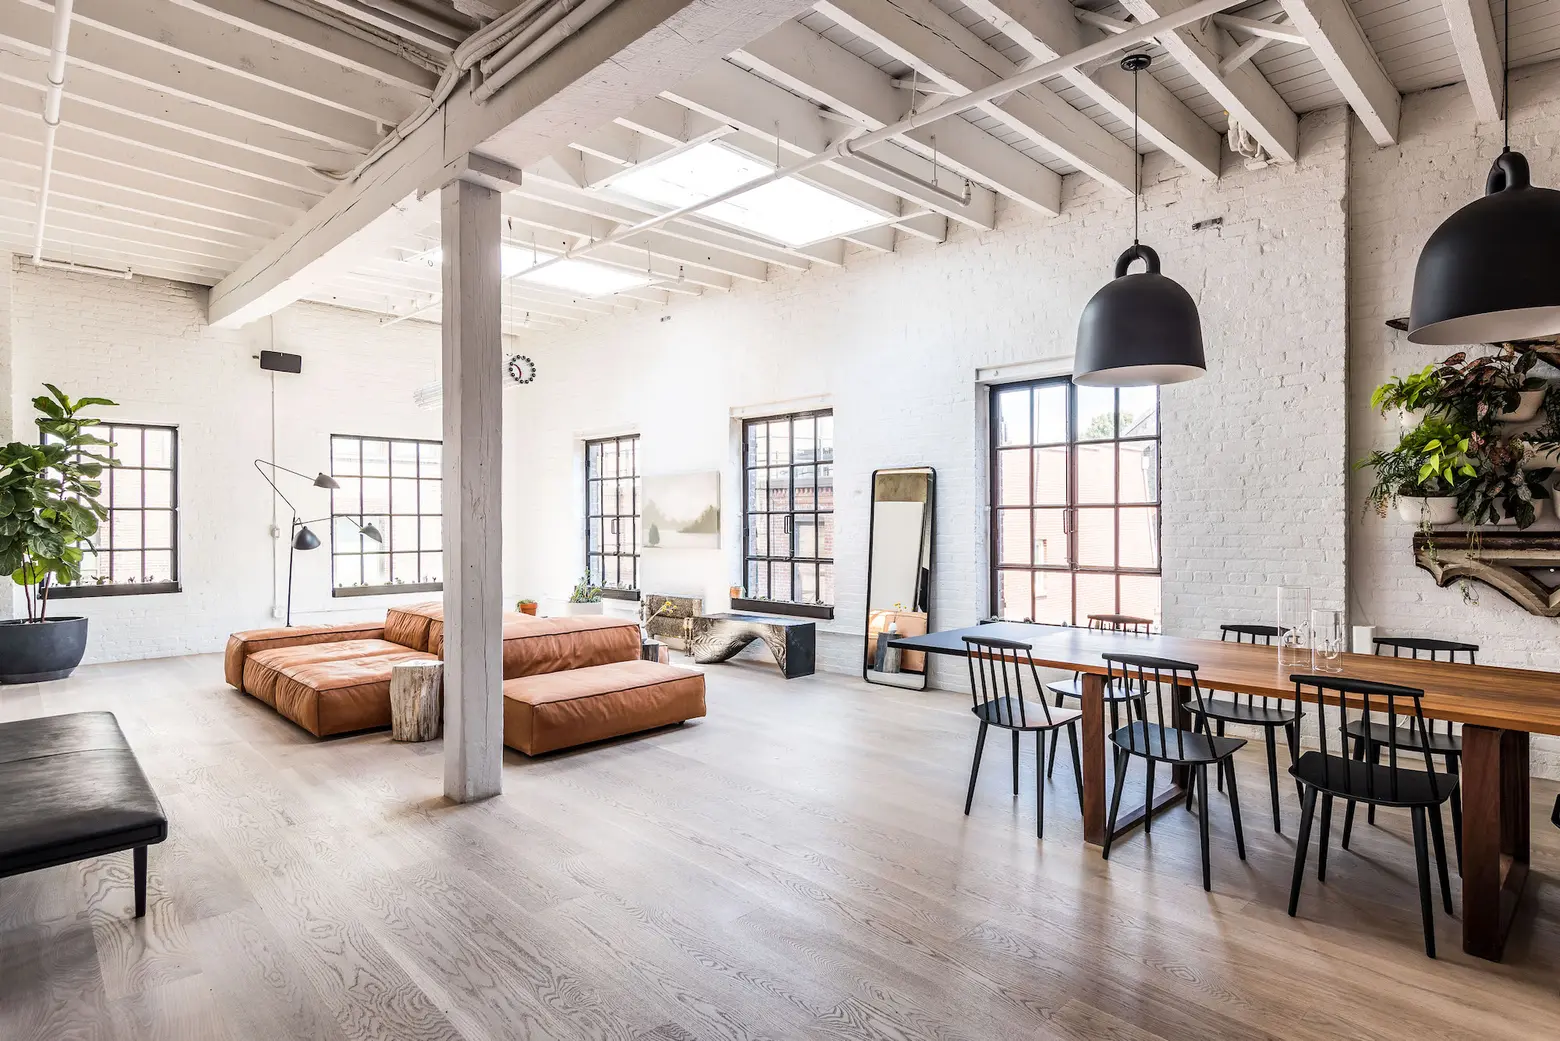 A classic Soho loft with an industrial-chic renovation and expansive rooftop terrace asks $4M